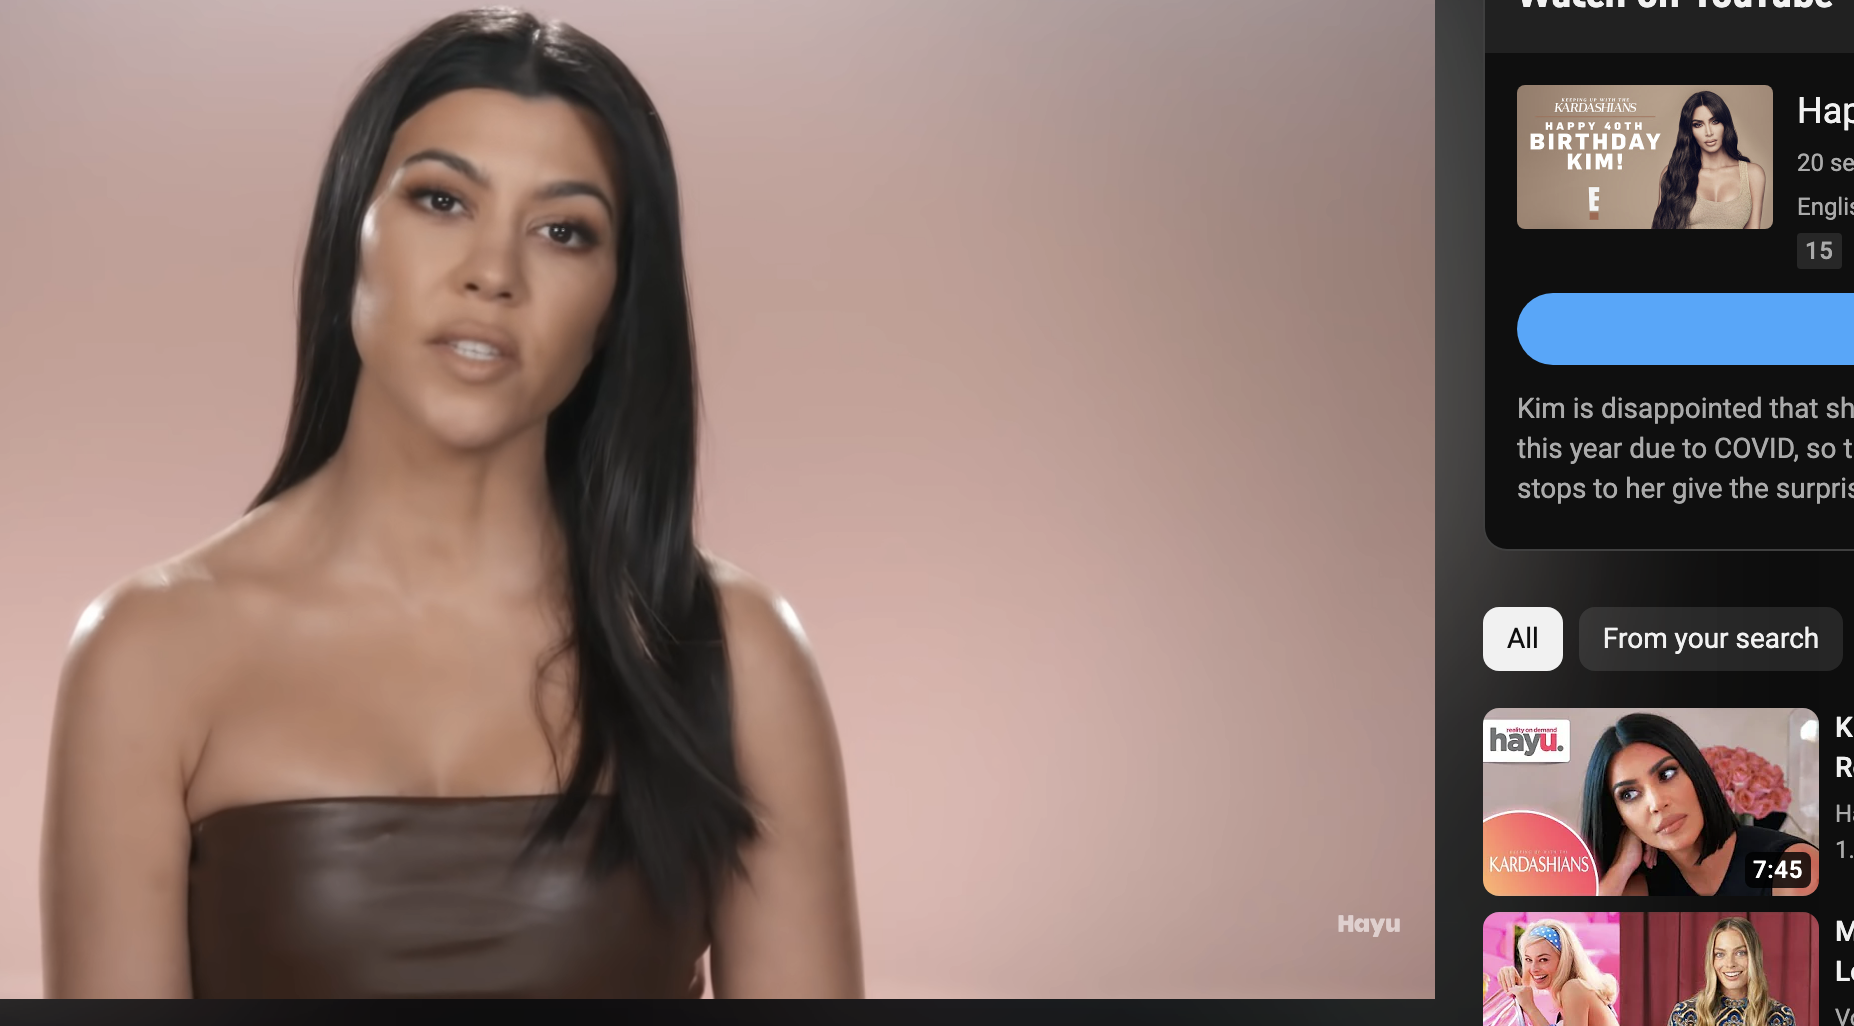 Kourtney Kardashian On Superficial Support From Family